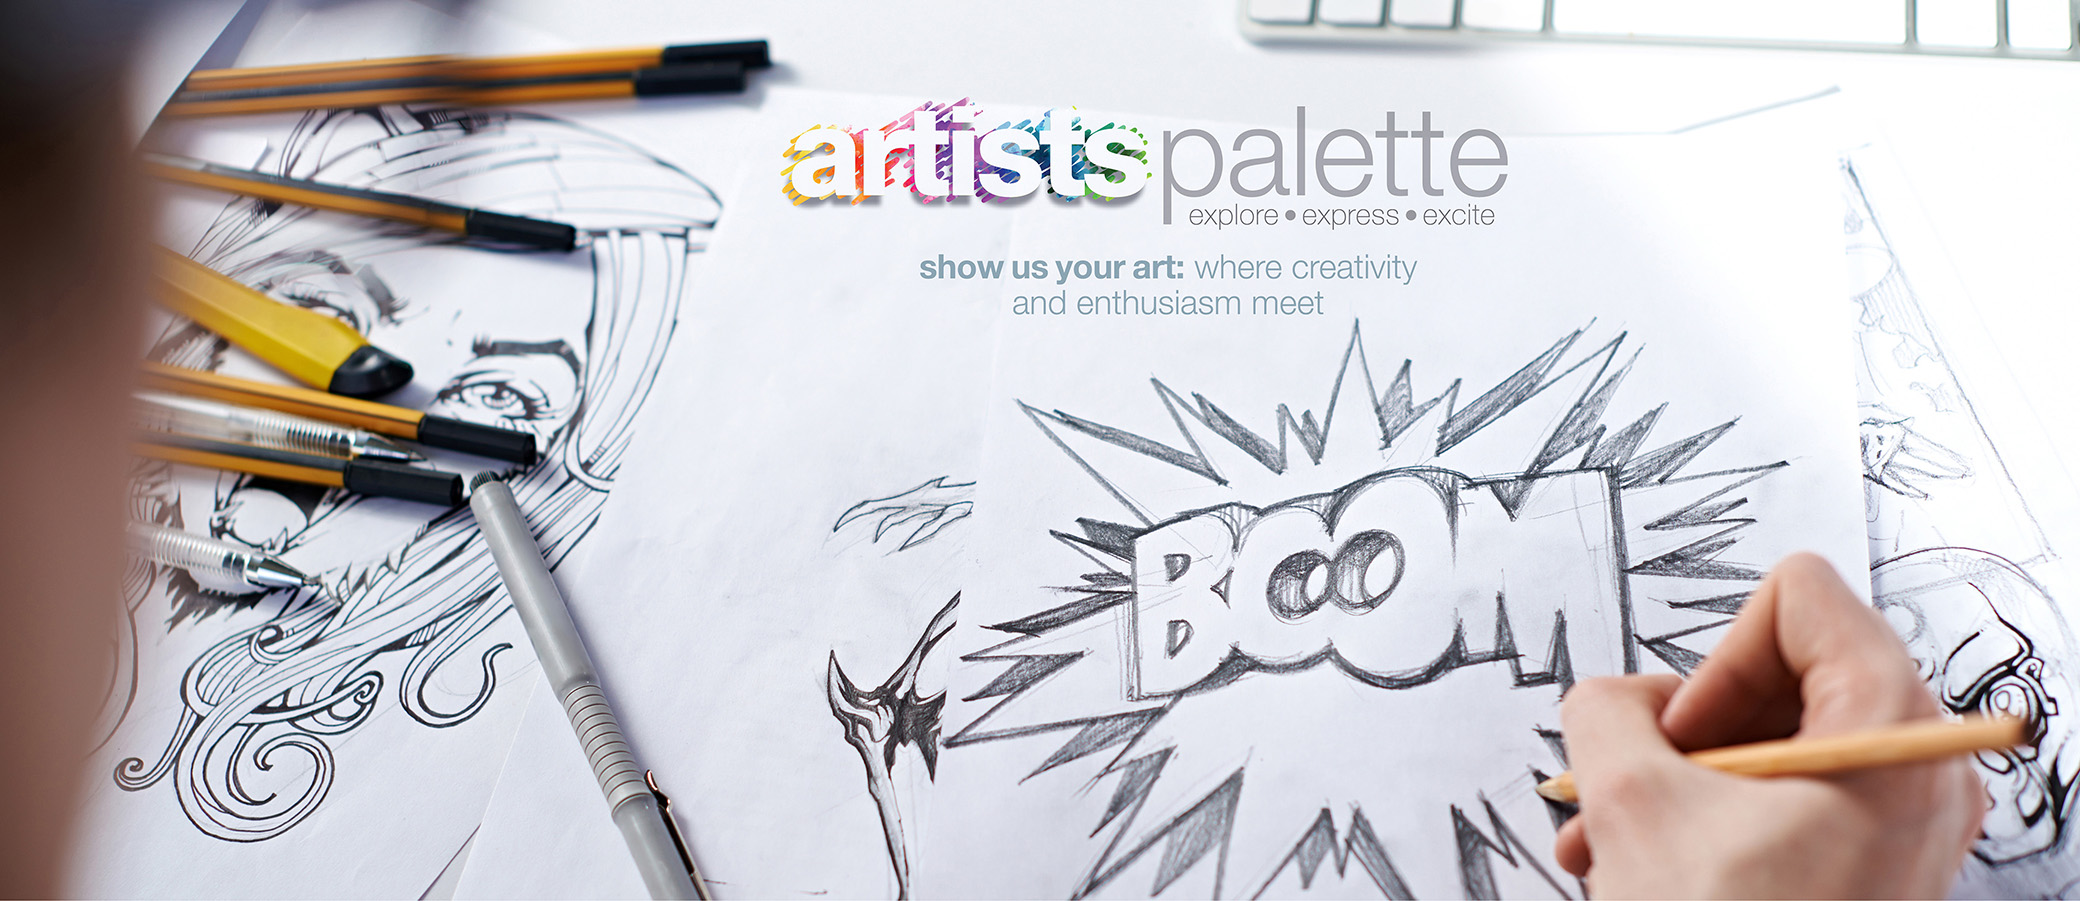 artists palette, art, artwork, artist, creative, drawing, sketch, painting, video, photo, photography, art submission, submitting art, submitting artwork, show us your art, creative, creative community, enthusiasm, design, writer